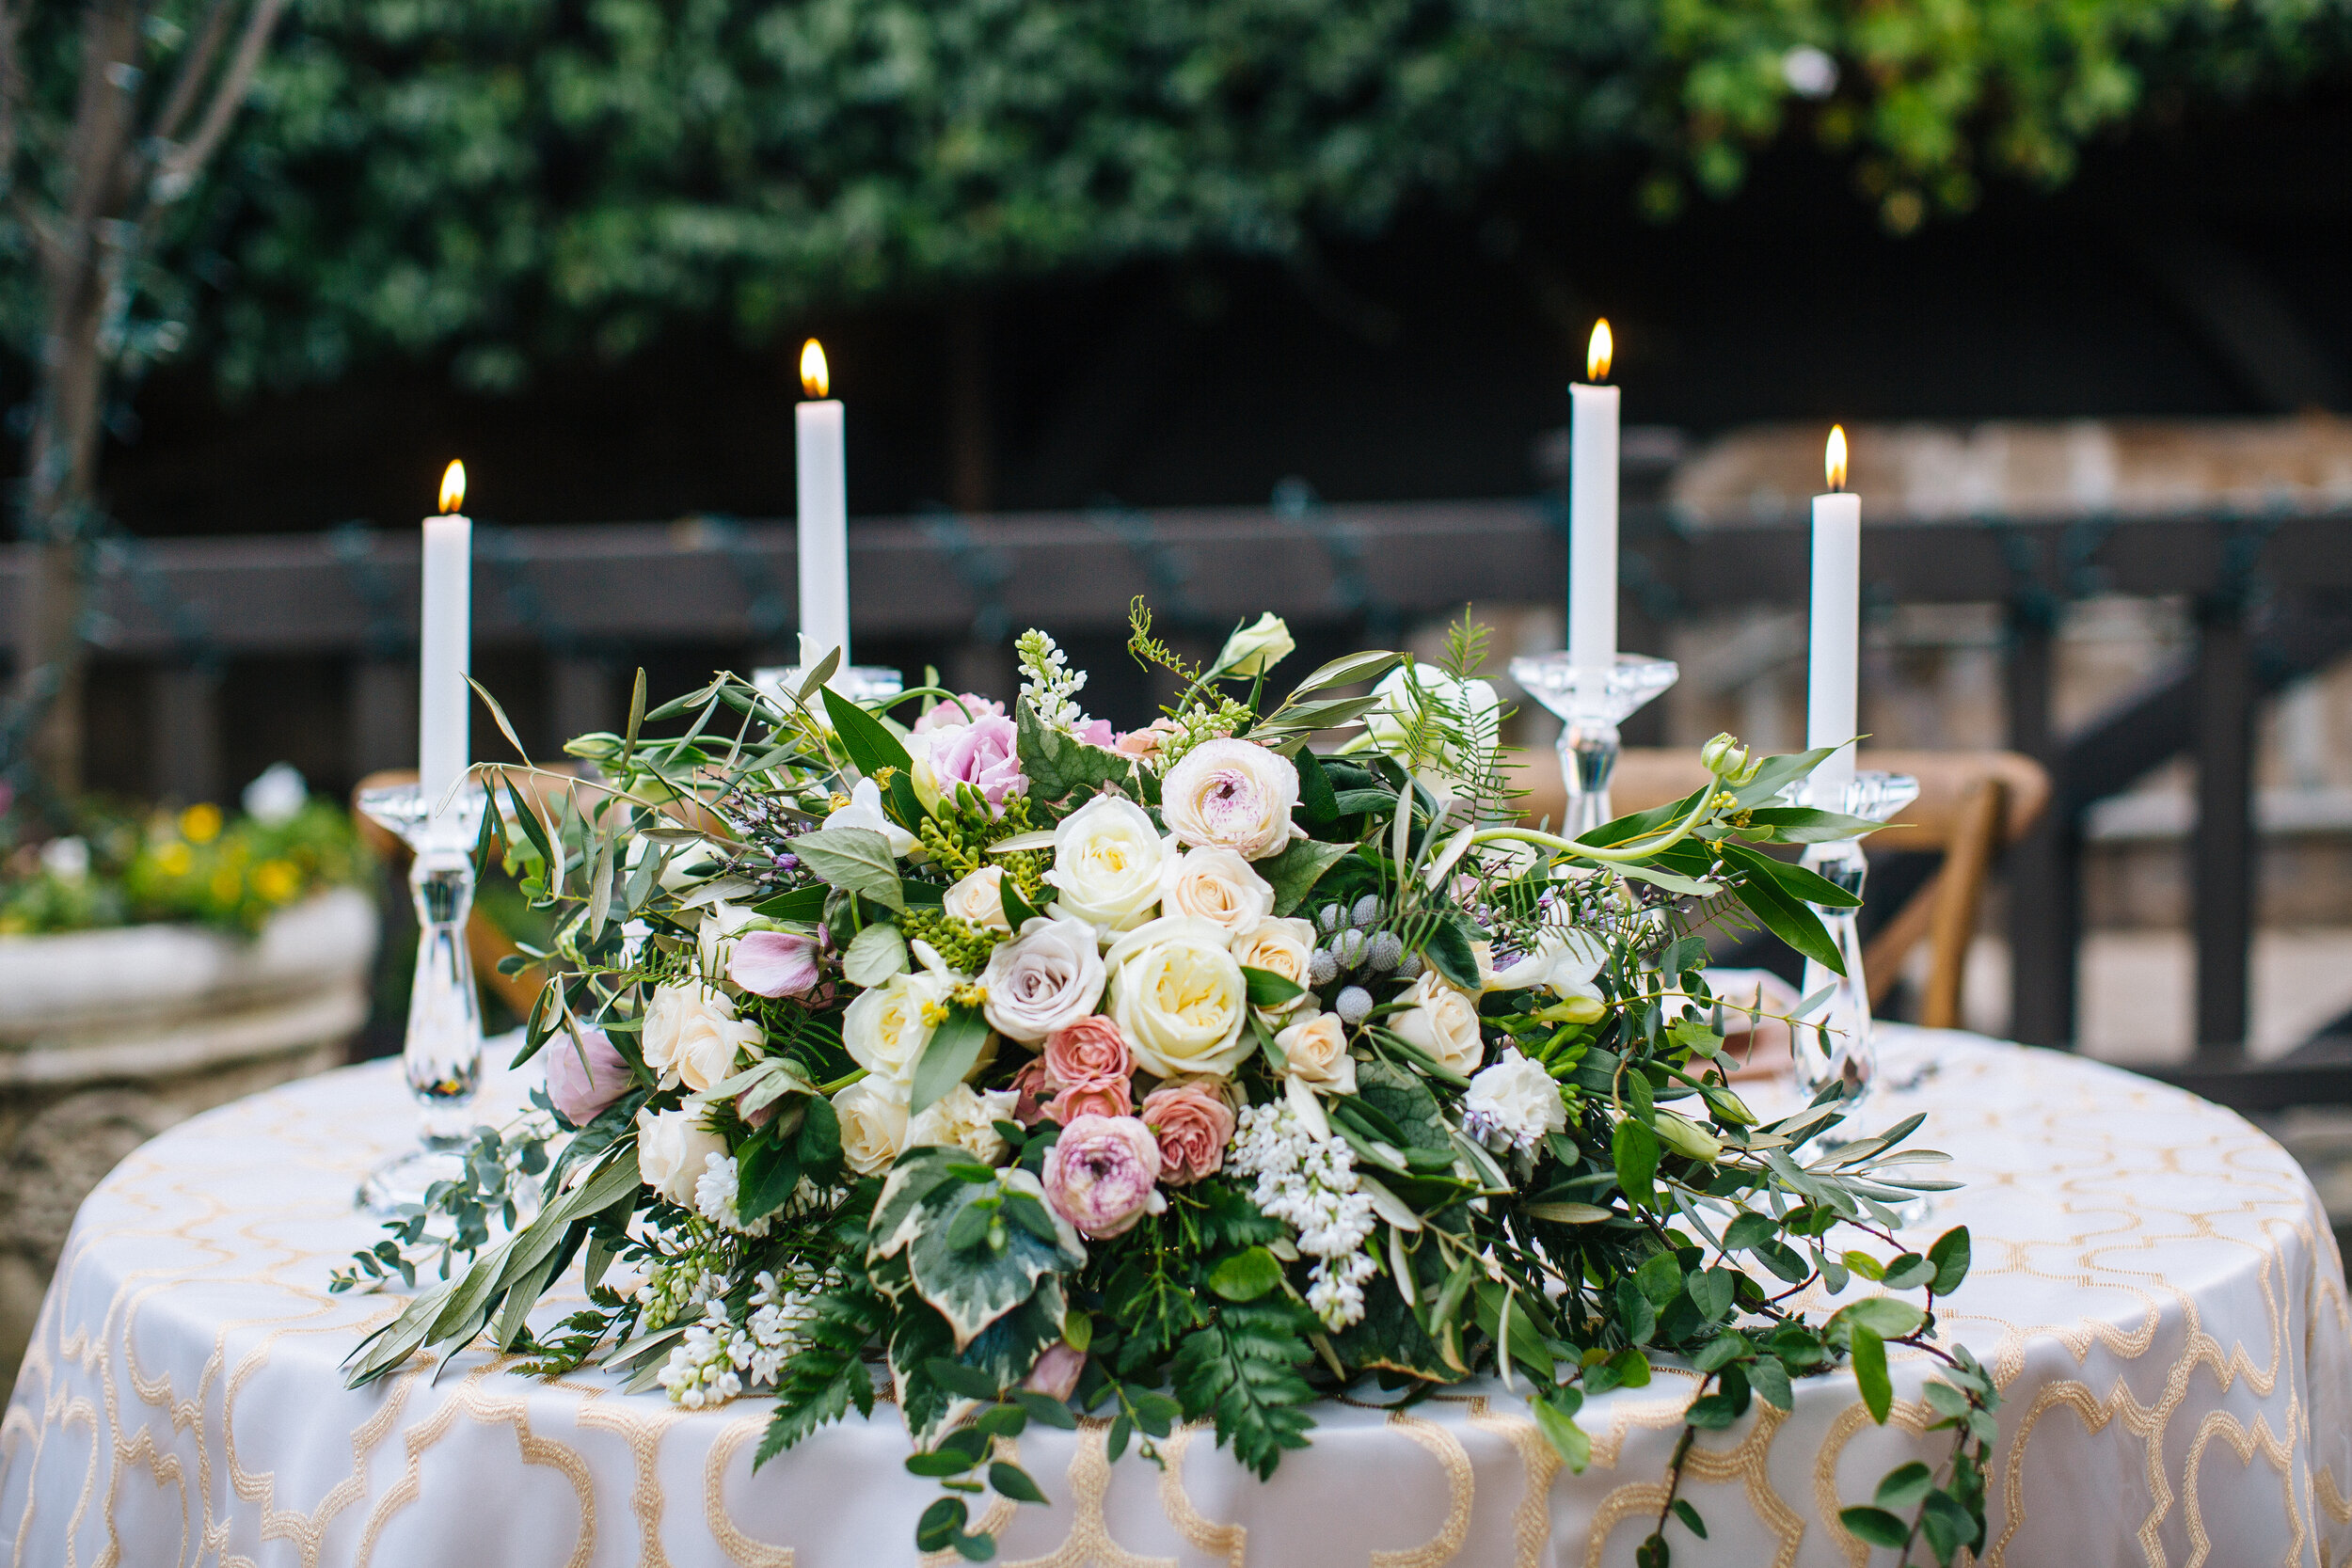 luxury-wedding-sweetheart-table-details-blushes-whites-upscale-taper-candles-inspiration-northern-california-sonoma-v-sattui-florist-violette-fleurs-anna-perevertaylo.jpg